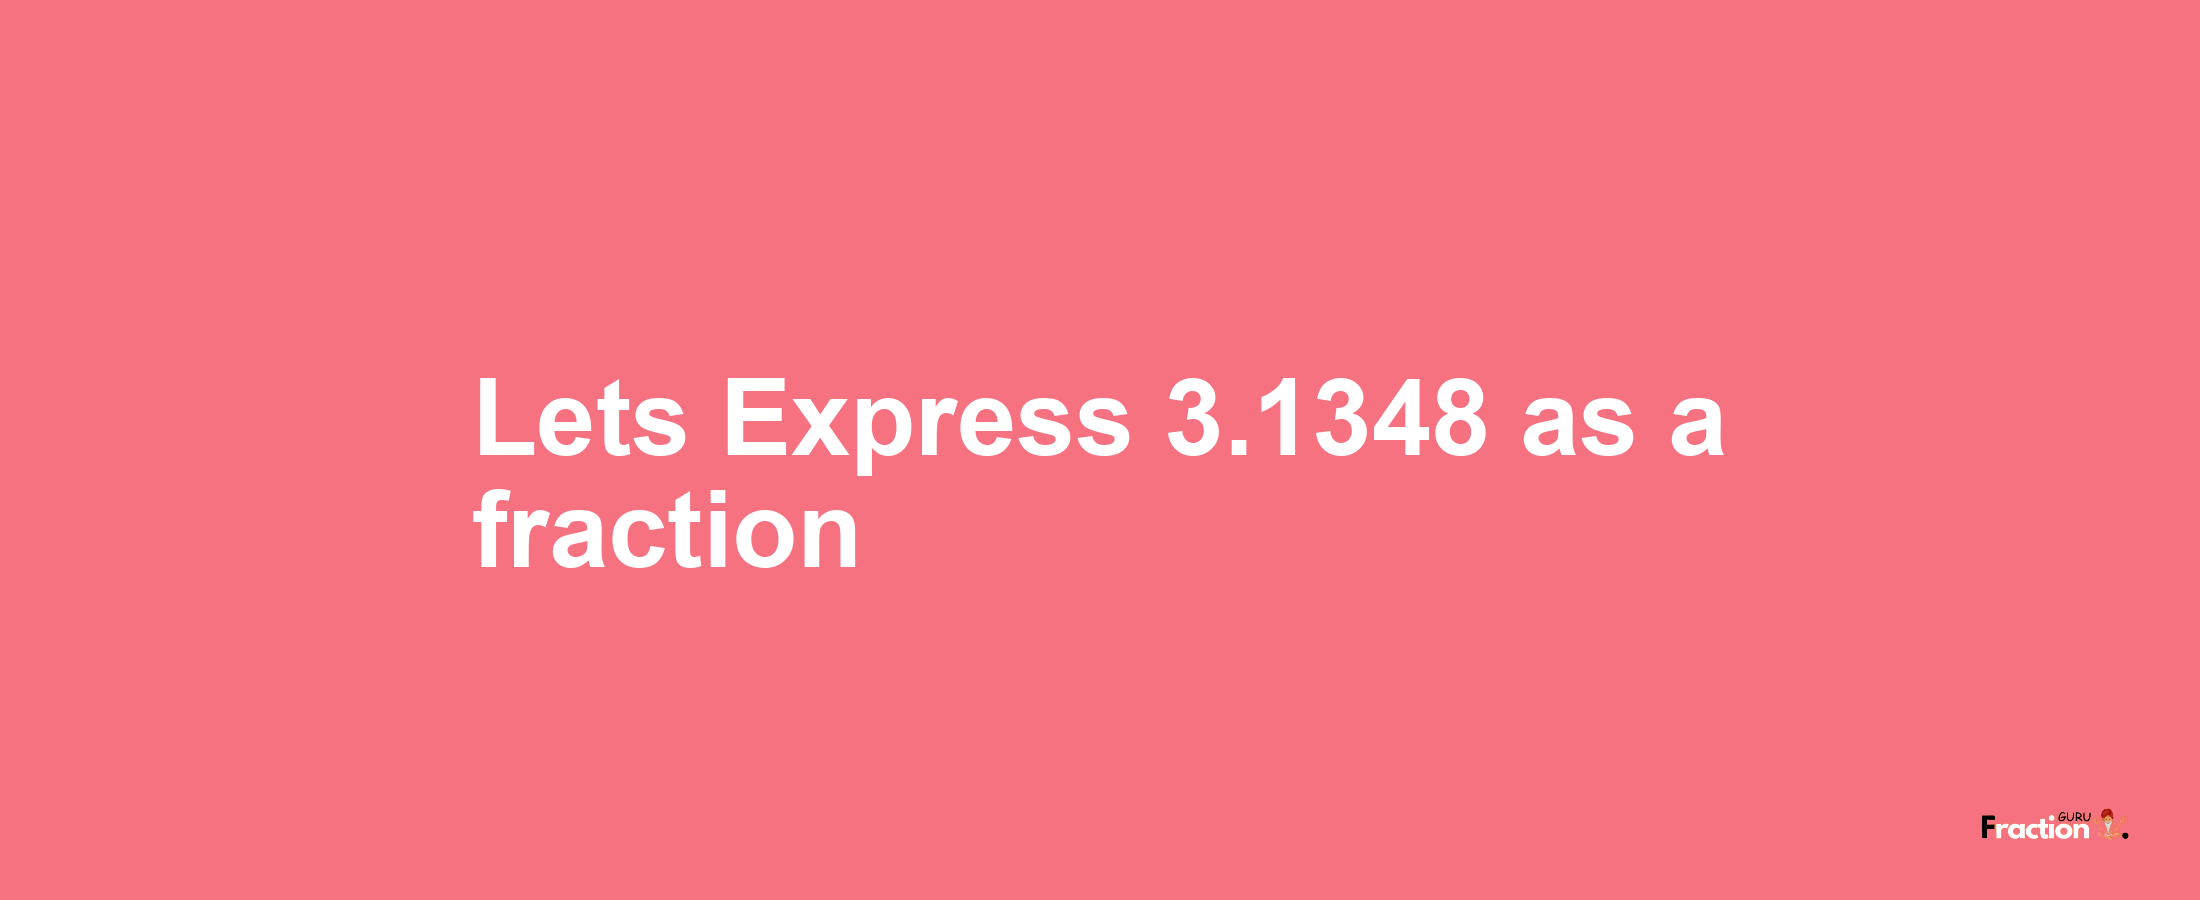 Lets Express 3.1348 as afraction